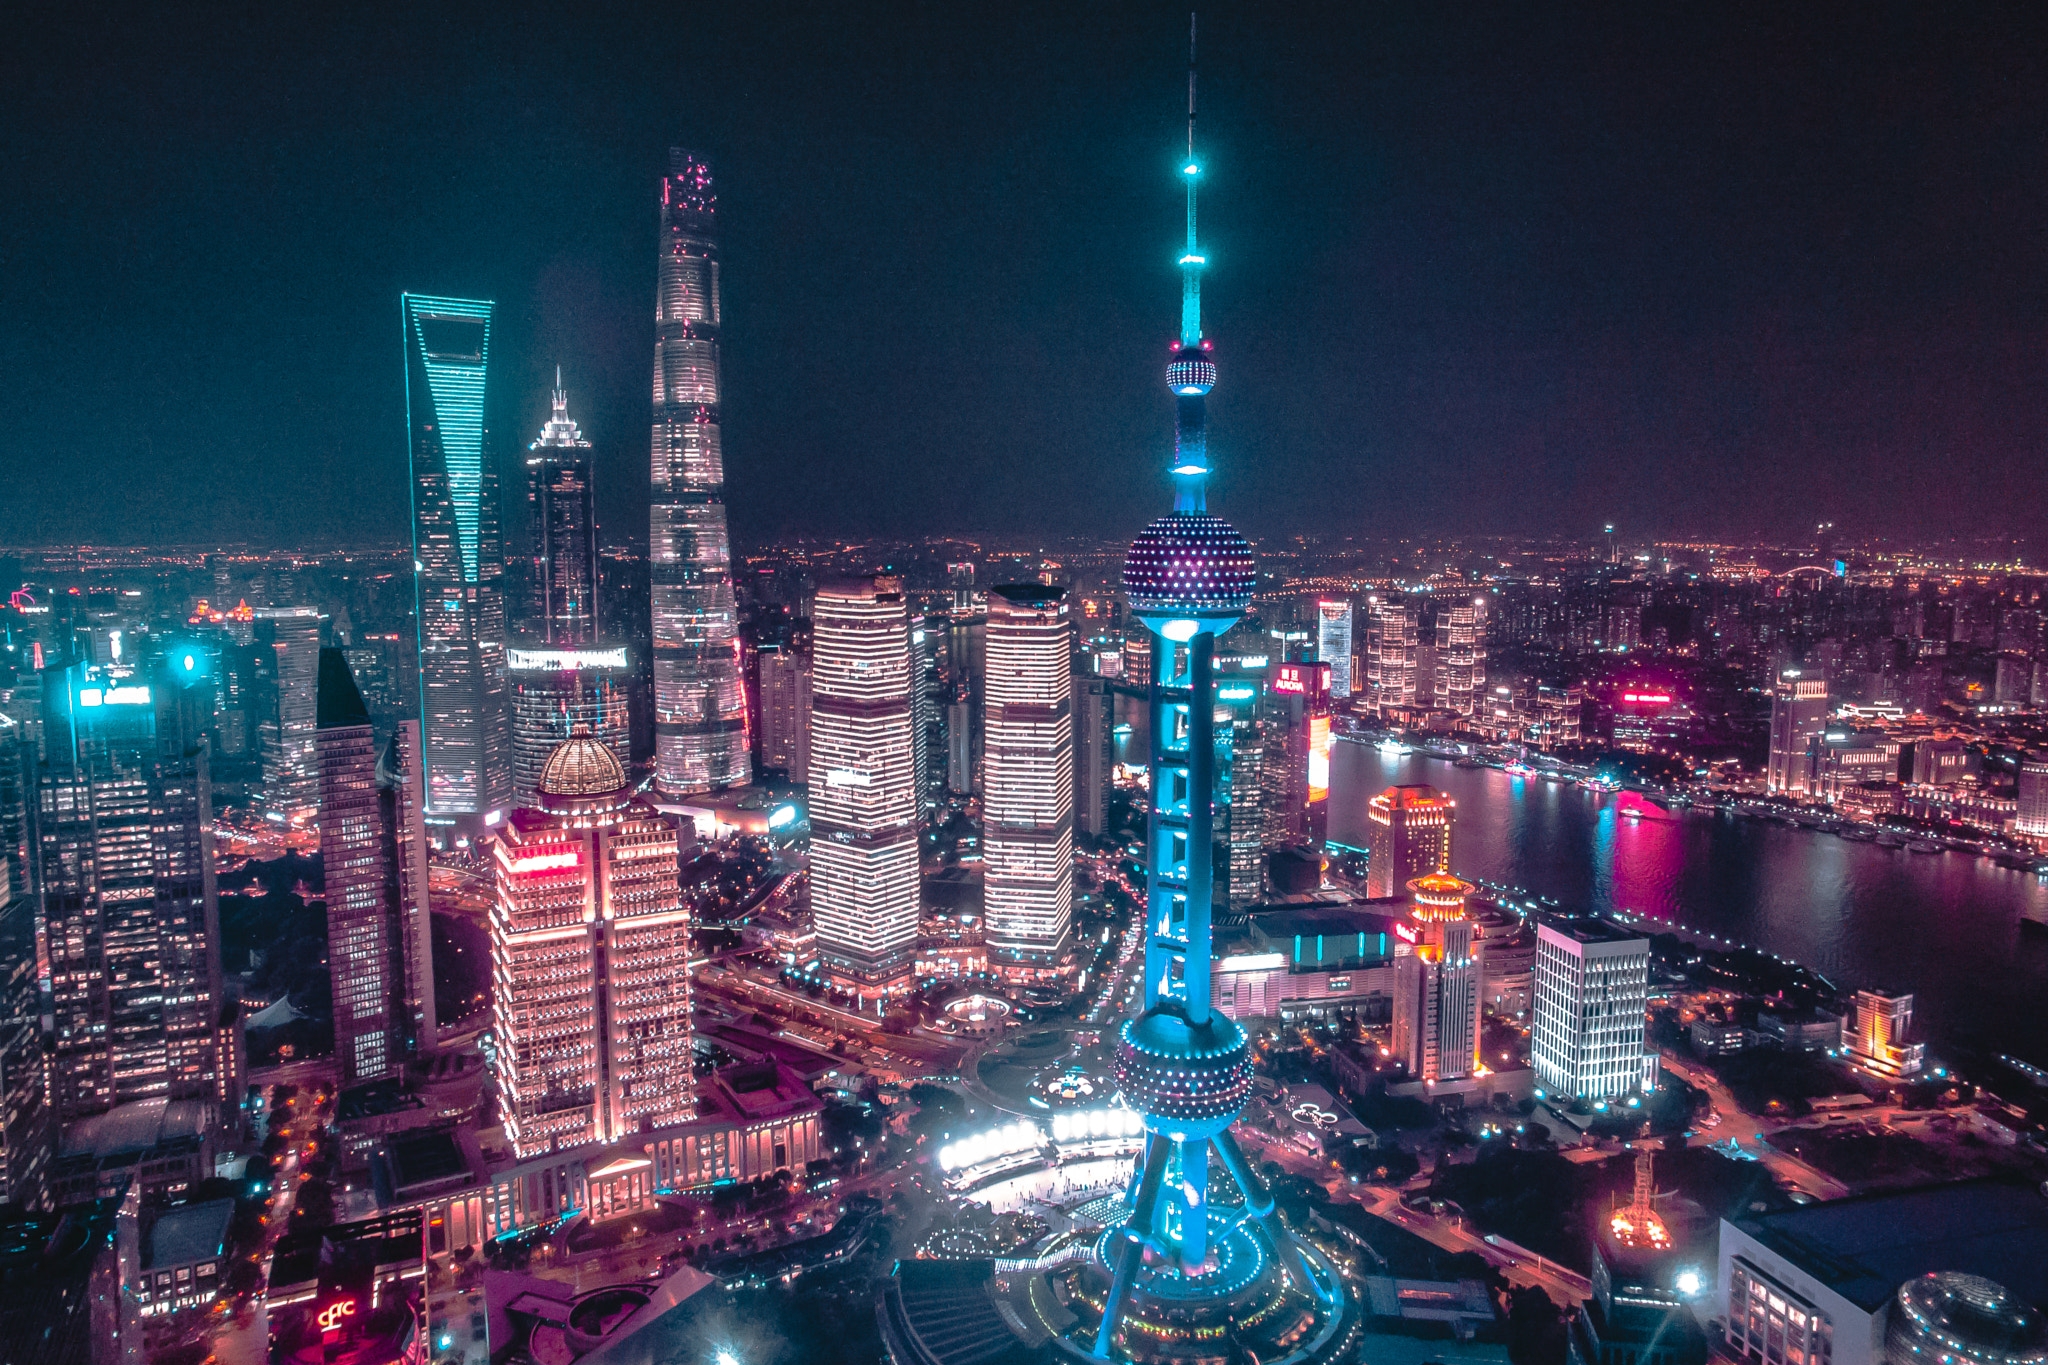 Aerial night view of Shanghai cityscape featuring brightly lit skyscrapers and the Oriental Pearl Tower with surrounding buildings illuminated.